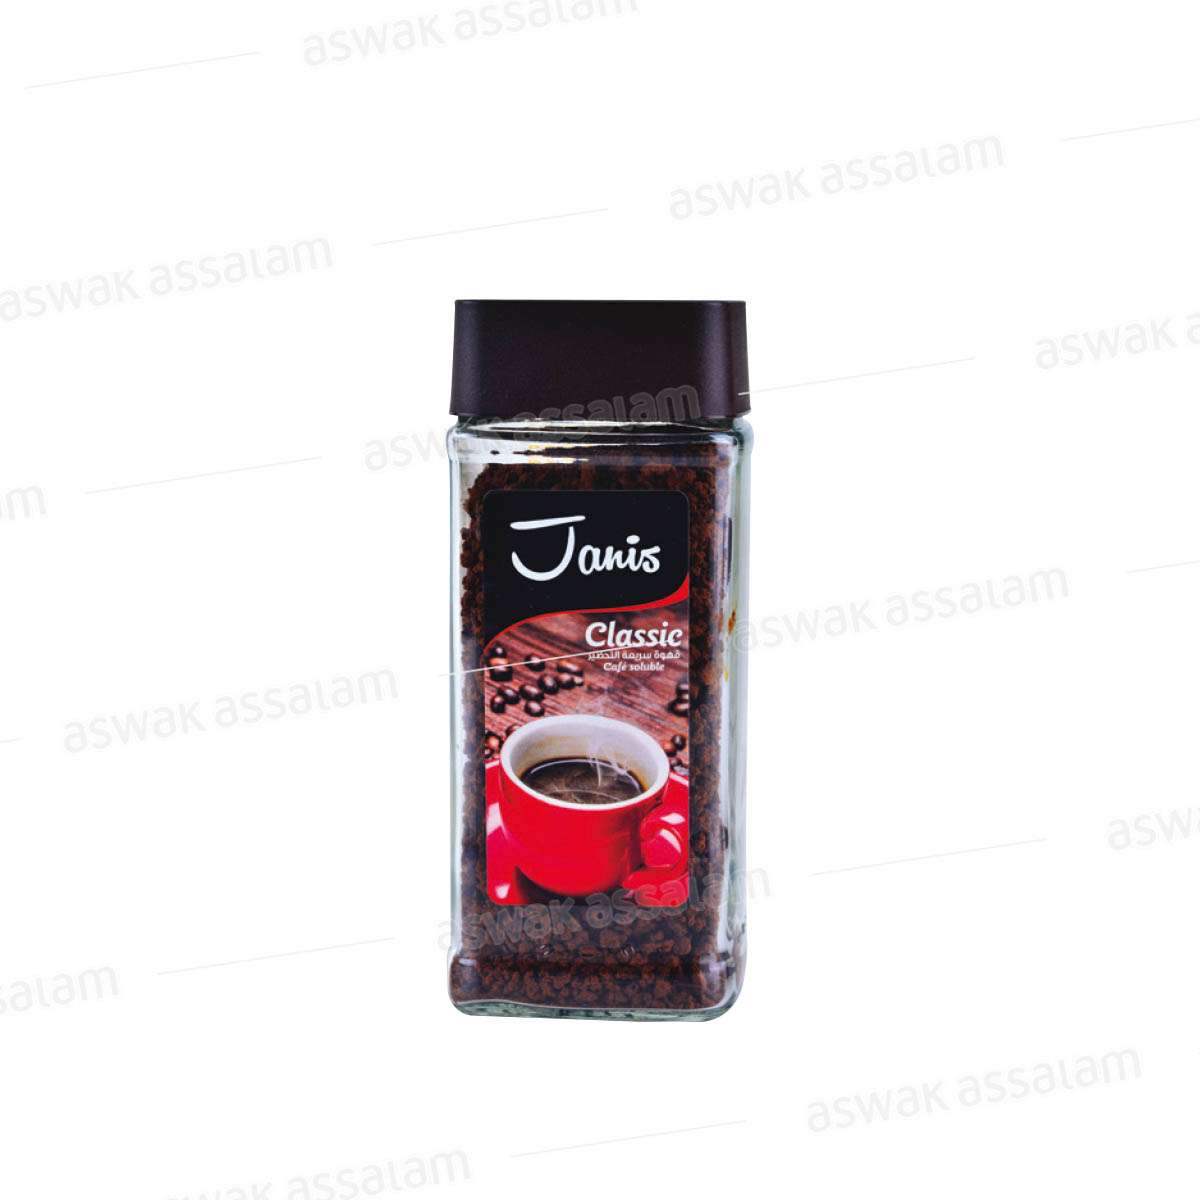 CAFE SOLUBLE CLASSIC 90G JANIS - Aswak Drive - AS from Aswak